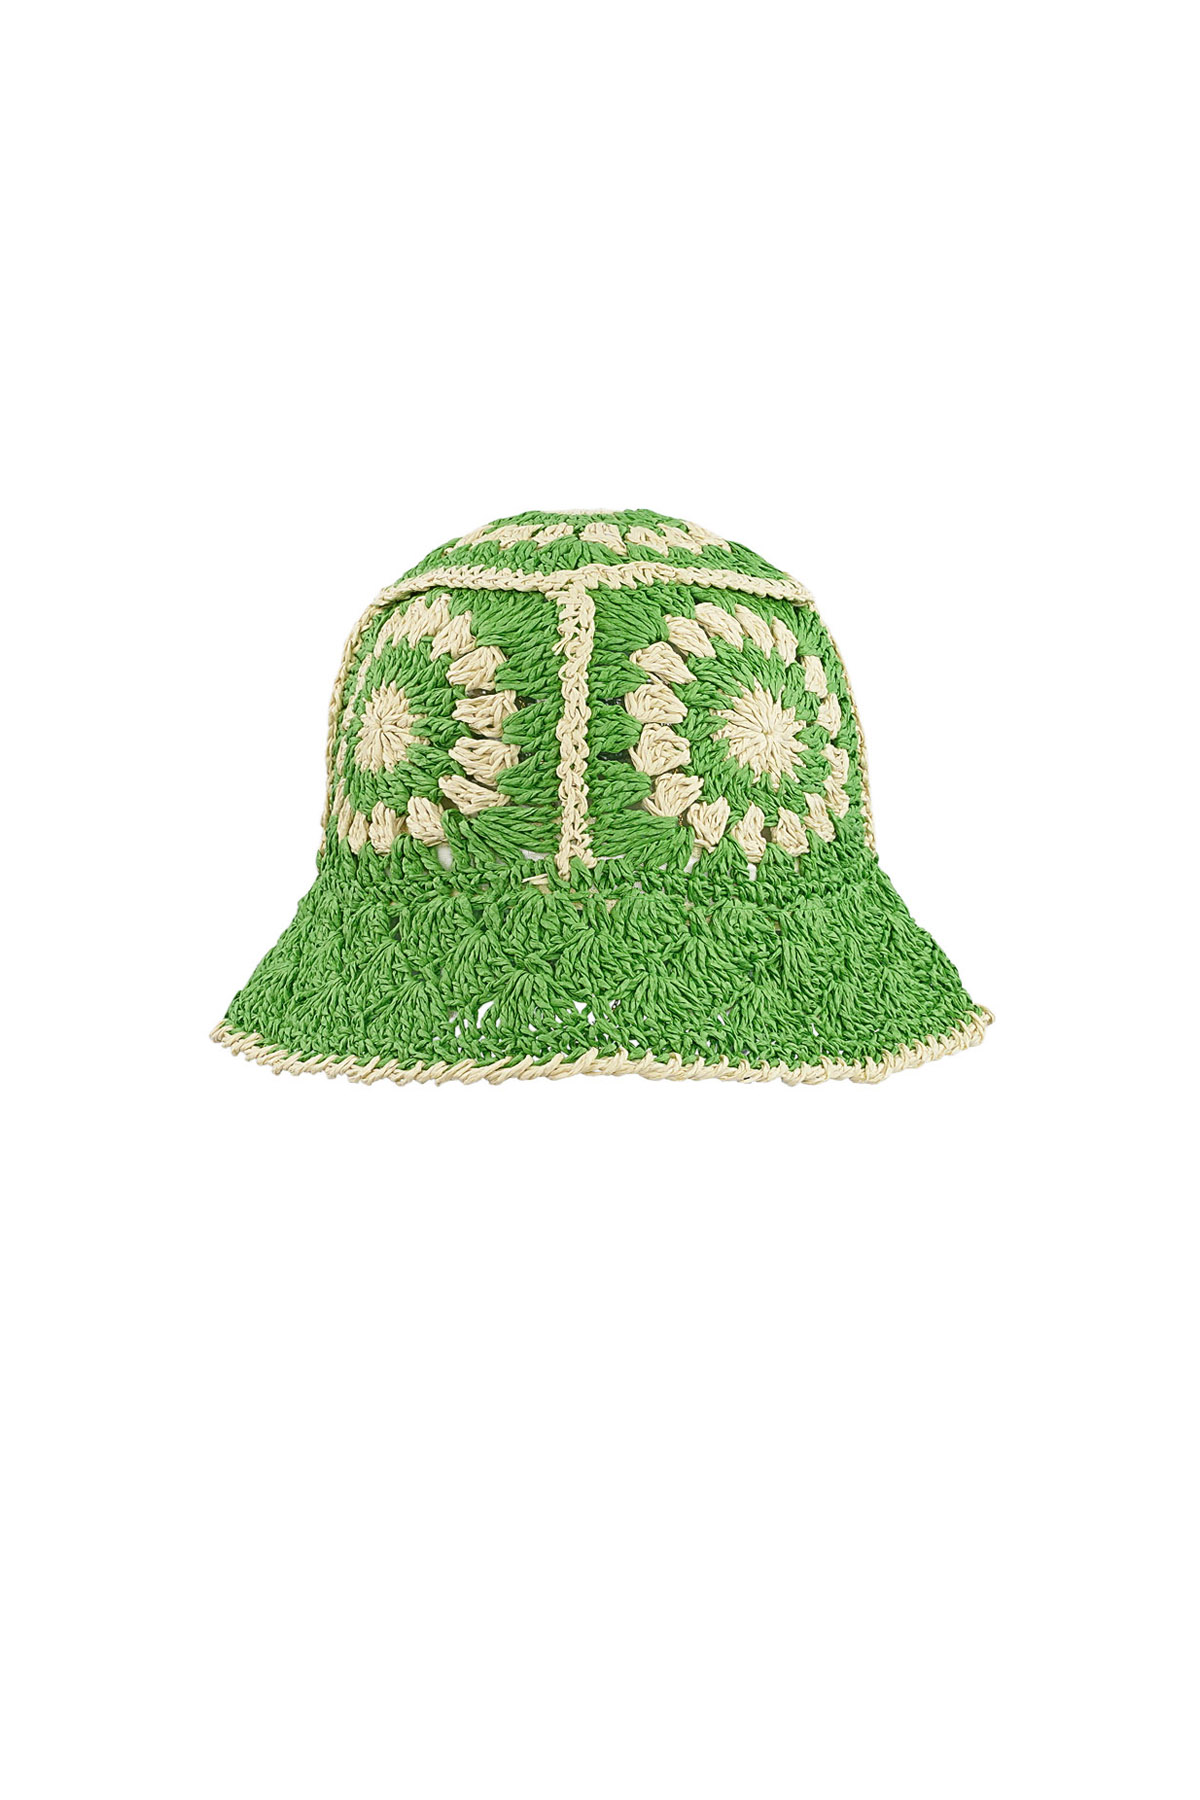 Crochet hat with flowers - green 